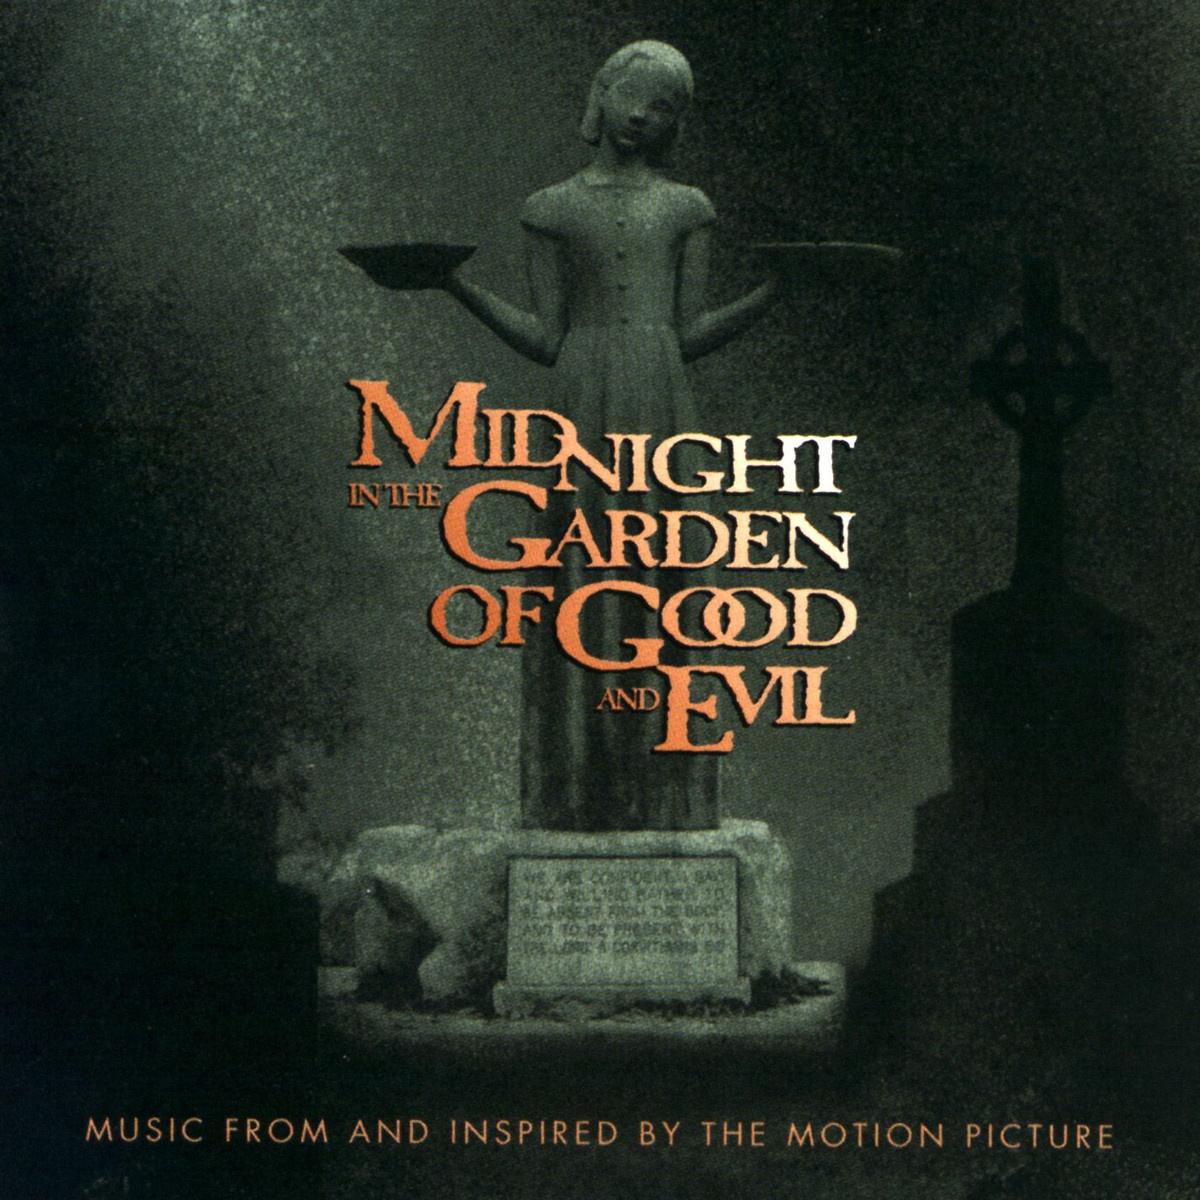 Midnight In the Garden of Good And Evil (Music From And Inspired By The Motion Picture)